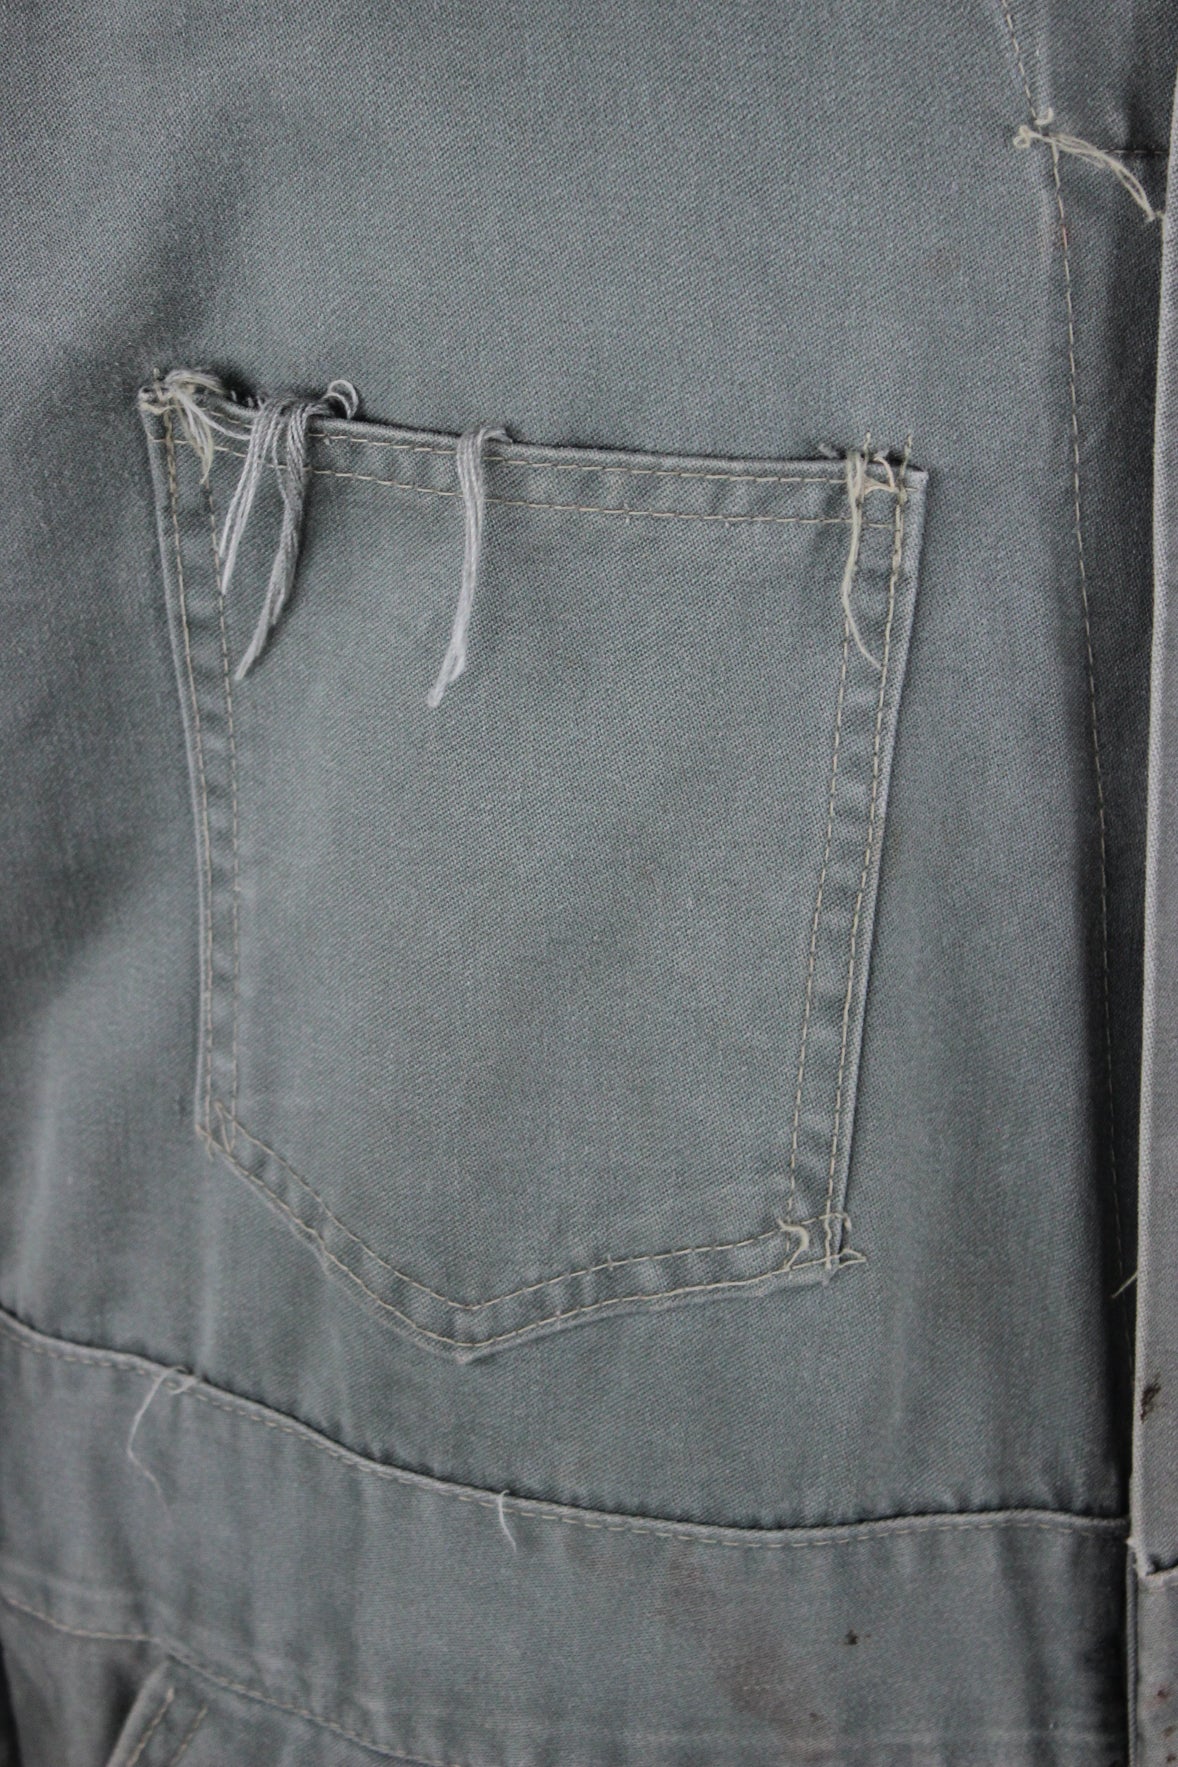 detail view of fraying at left breast pocket of coveralls.